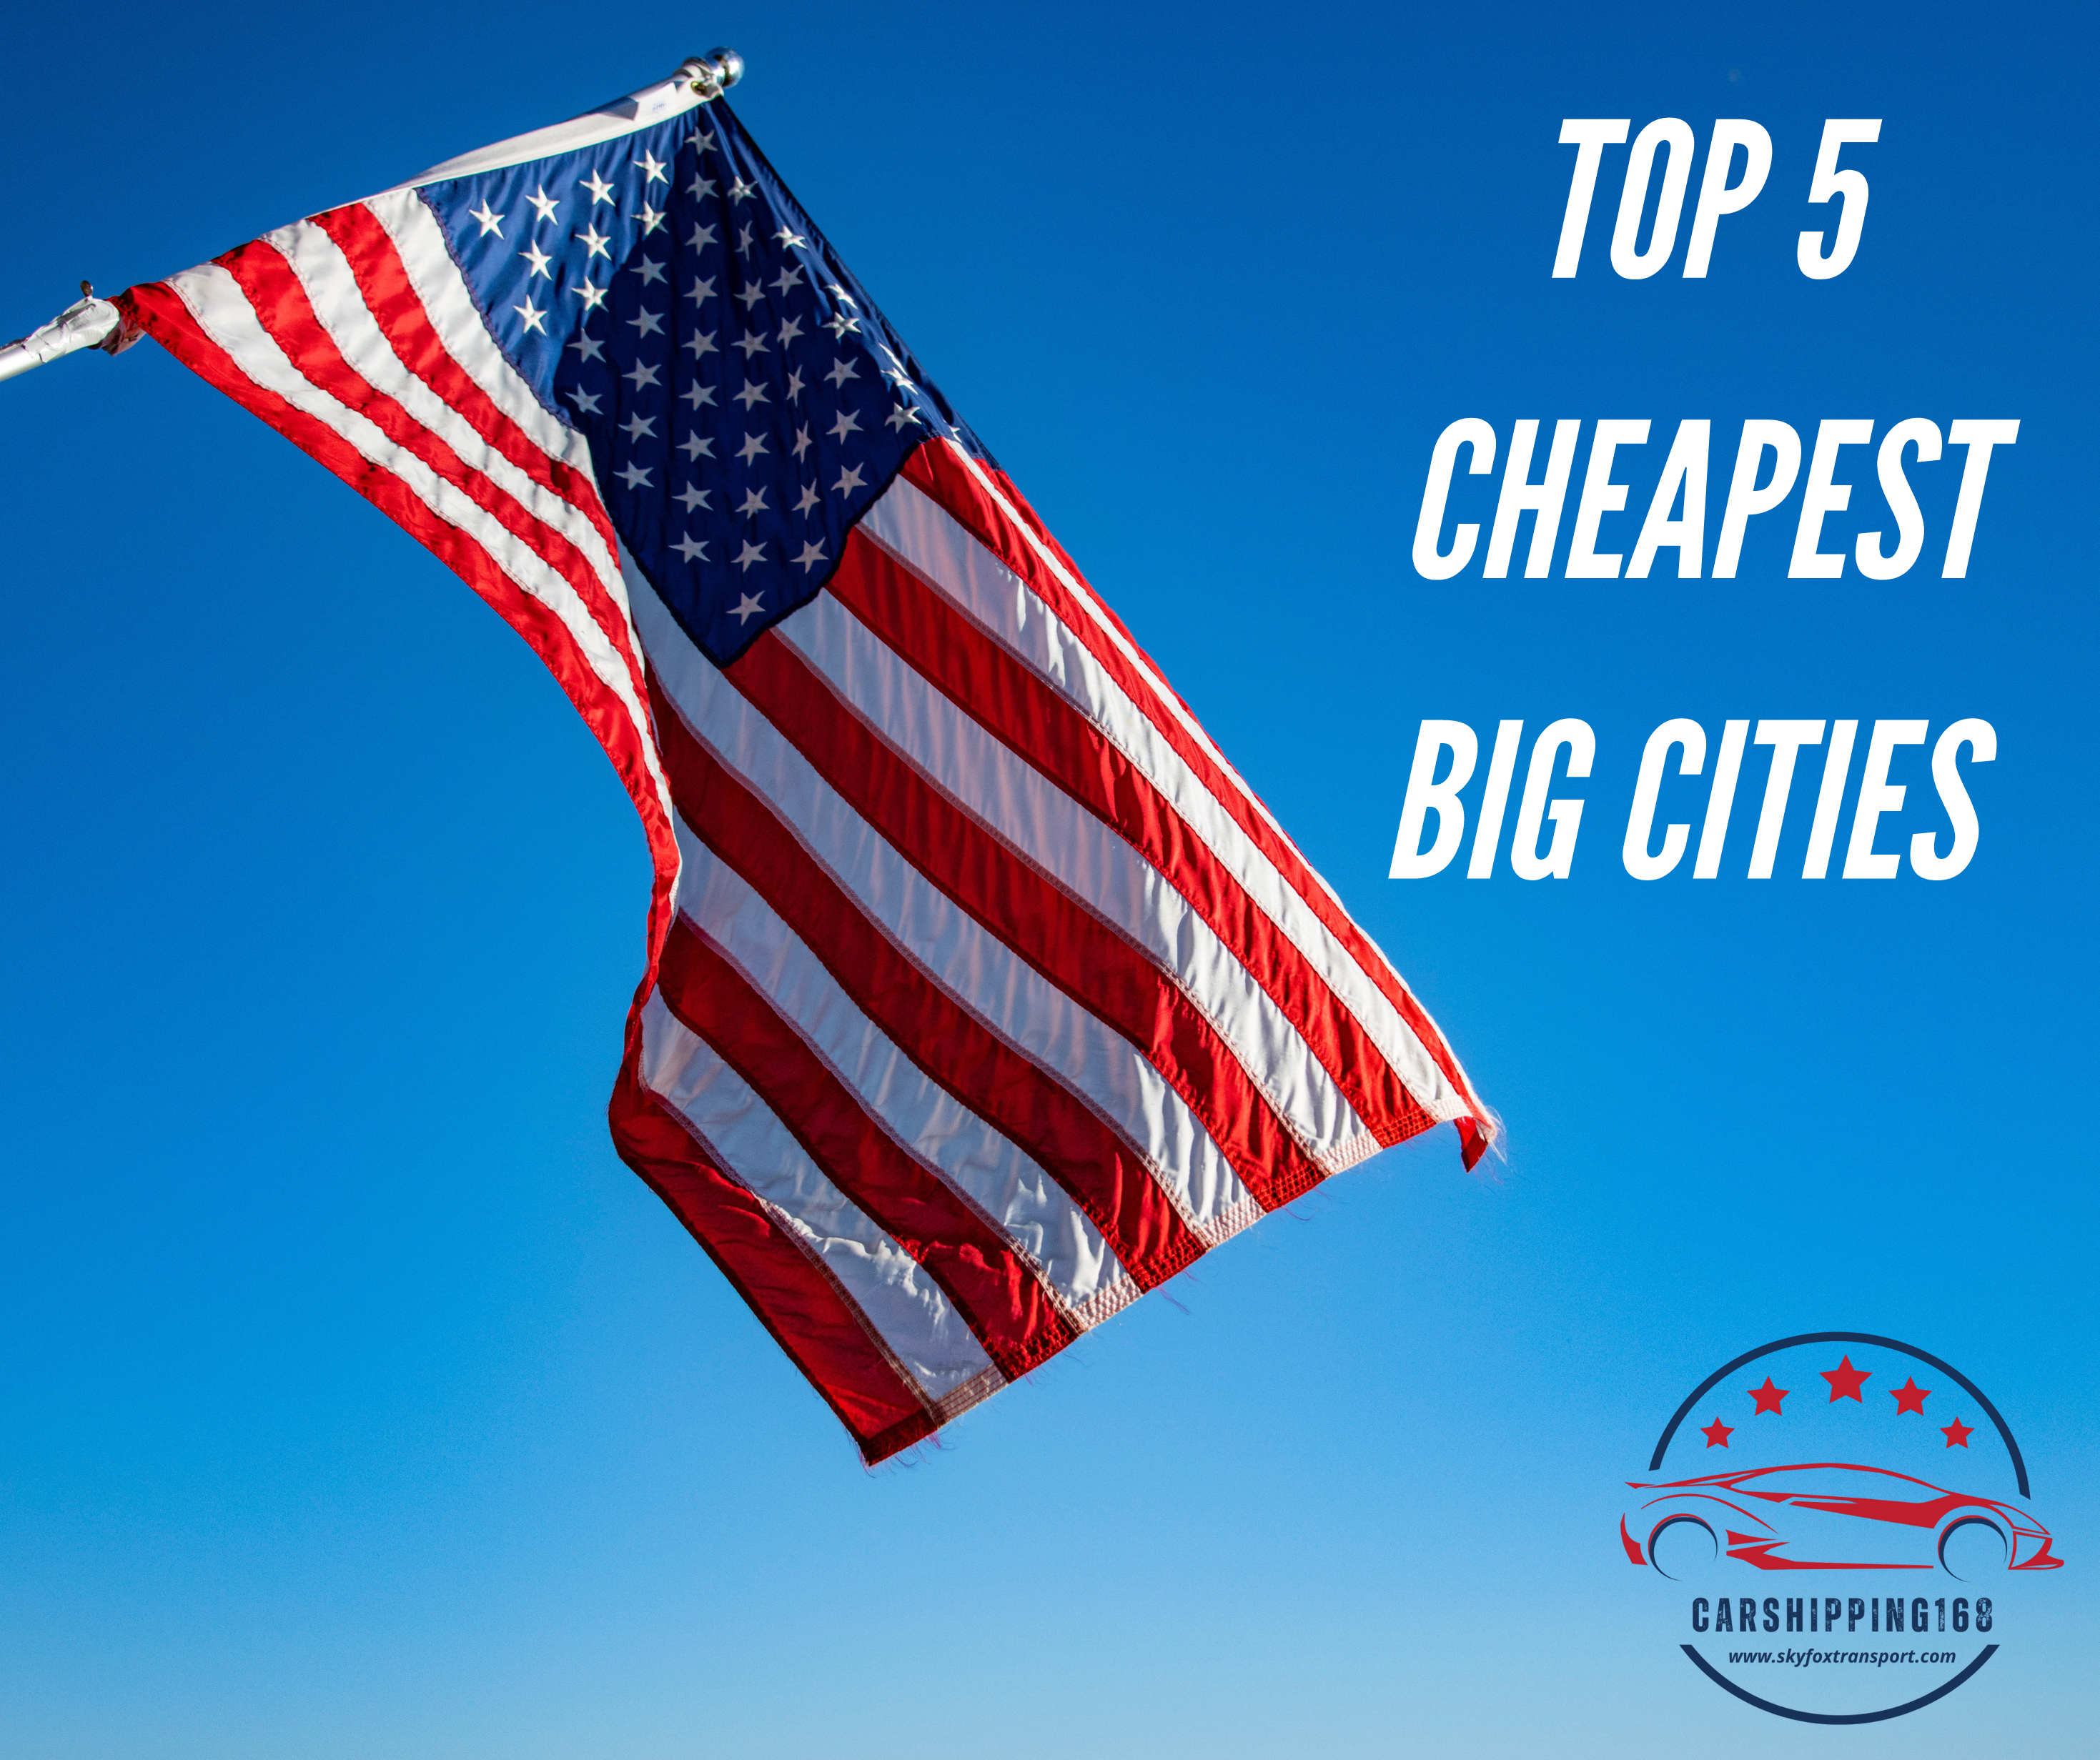 Don’t like Texas? We carefully selected another 5 Cheap Big Cities to move and live in 2023